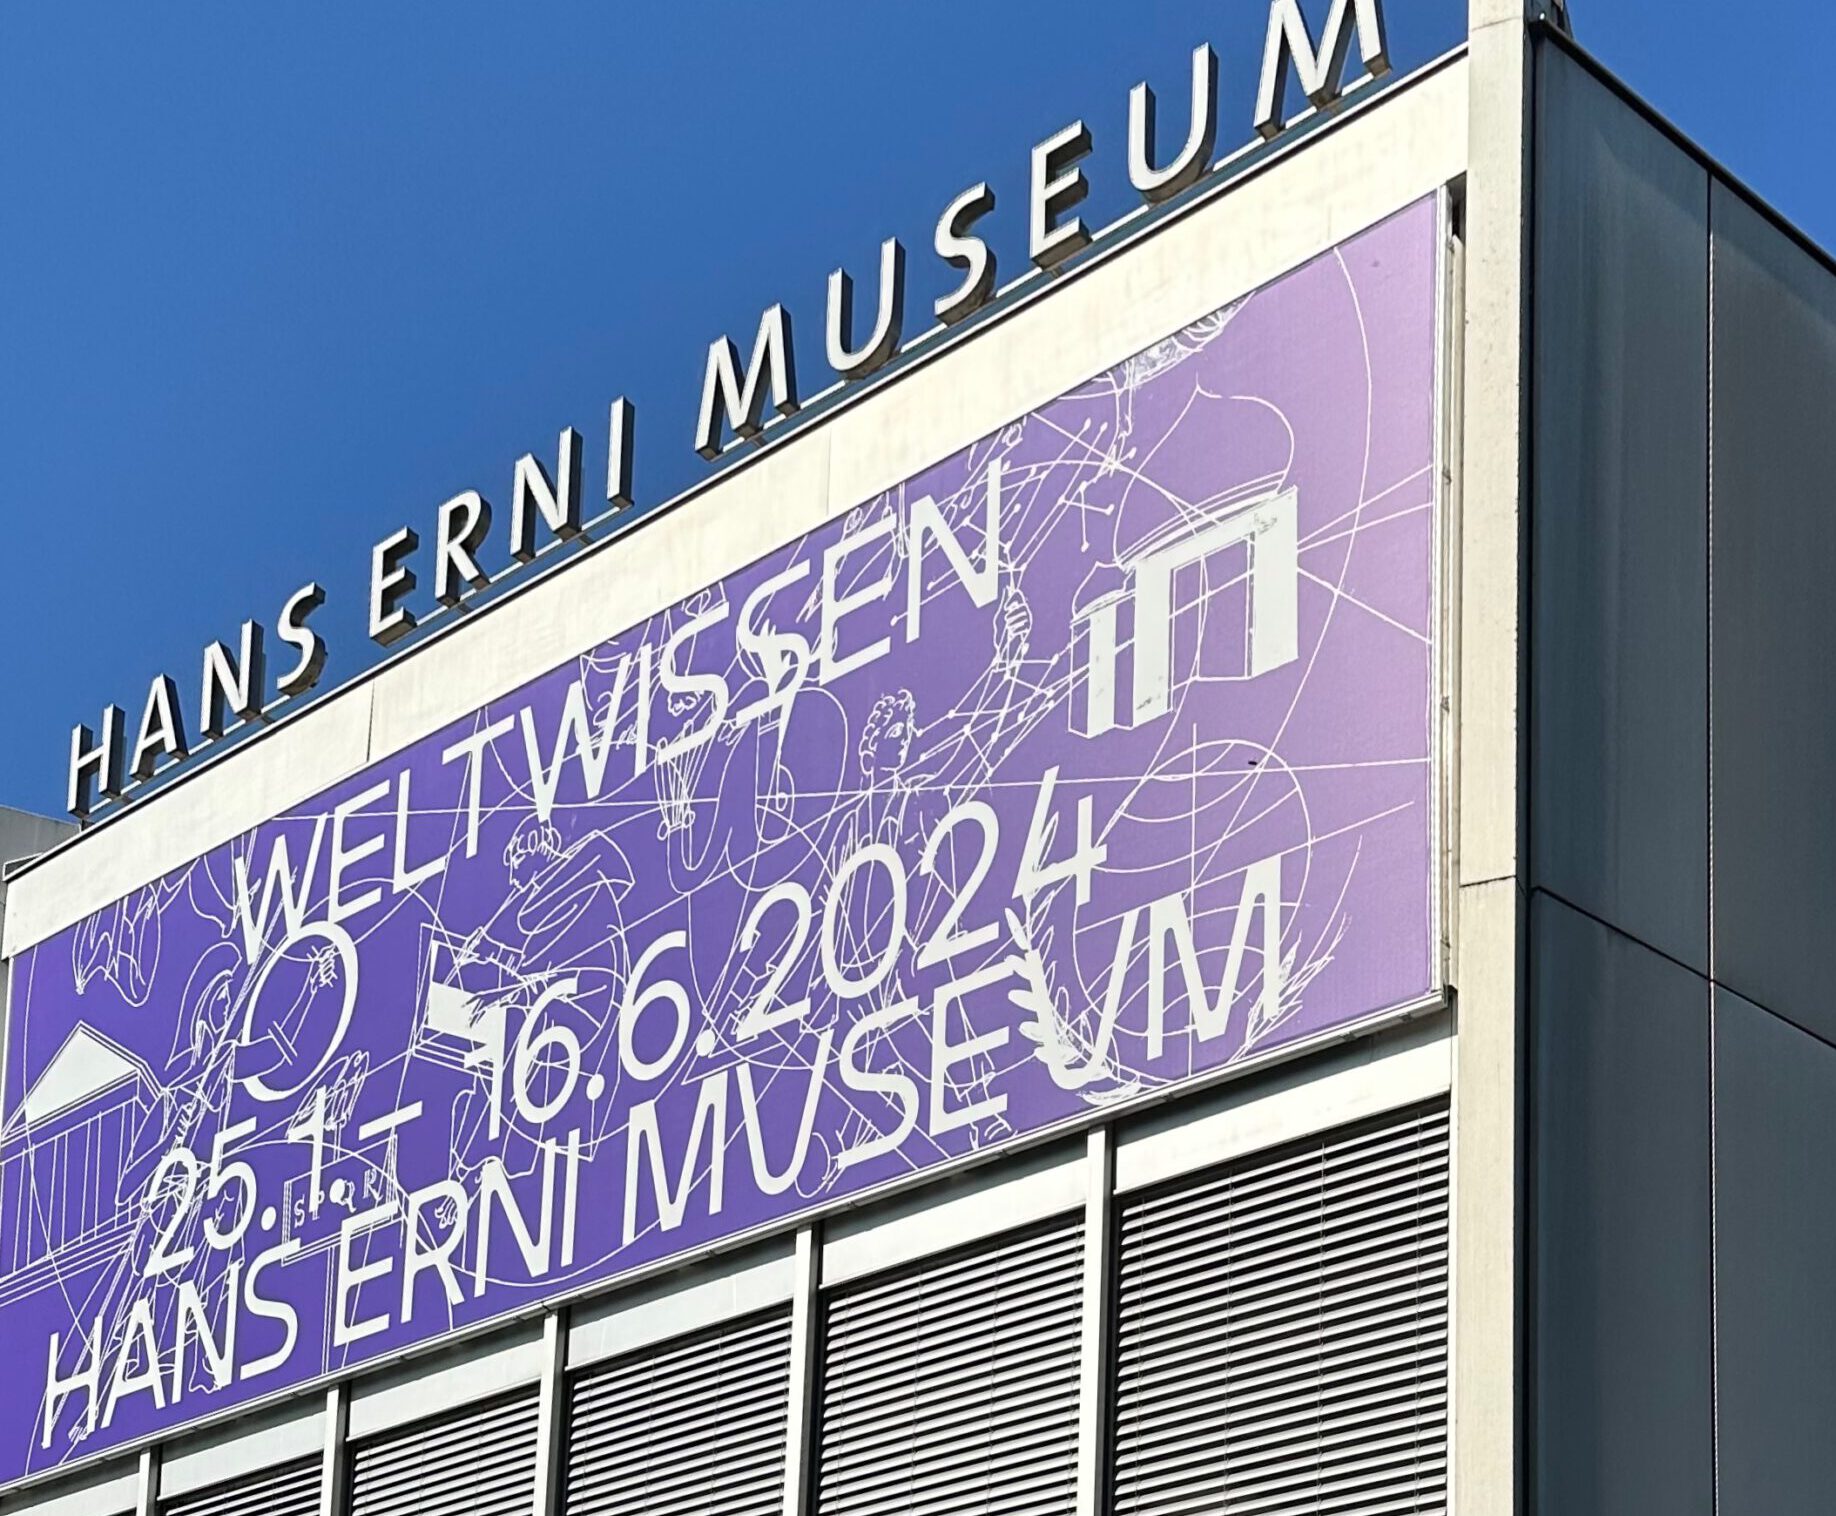 HANS ERNI MUSEUM, Lucerne, Switzerland / WORLD KNOWLEDGE. The Encyclopedia from Diderot to Hans Erni to the Present Day